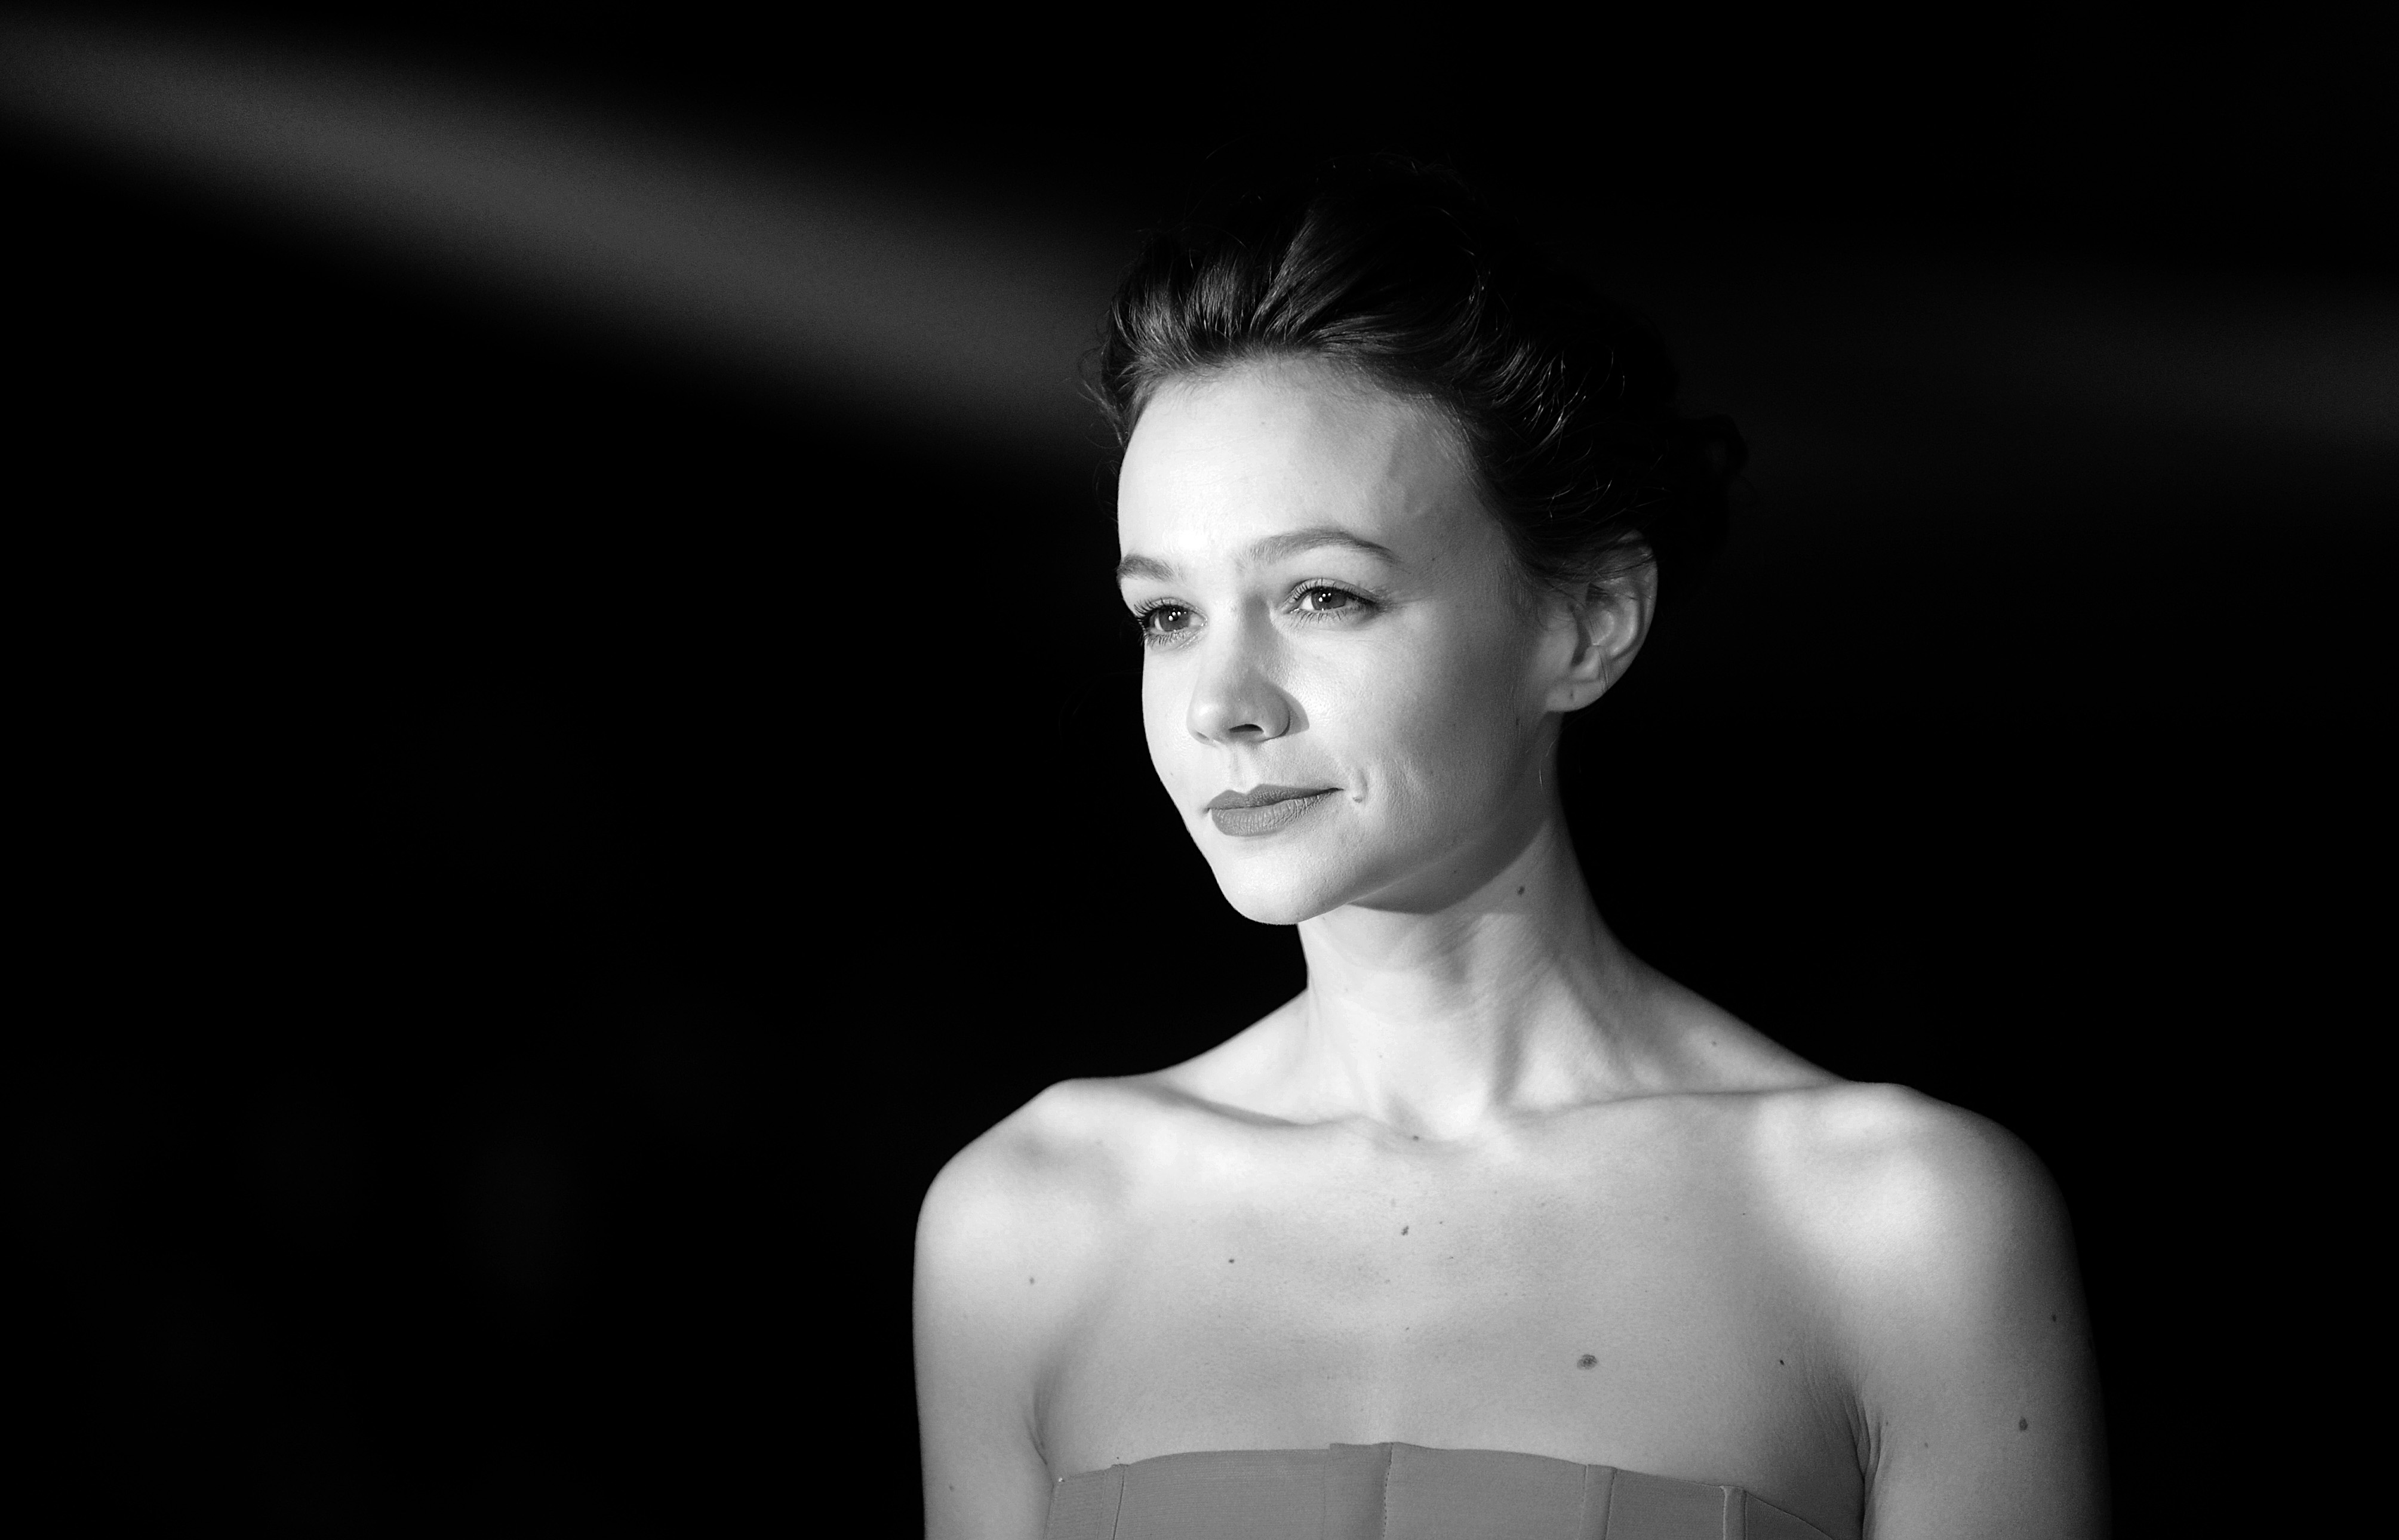 LONDON, UNITED KINGDOM - OCTOBER 15: (EDITORS NOTE: This image has been converted to black and white) Carey Mulligan attends the screening of "Inside Llewyn Davis" Centrepiece Gala Supported By The Mayor Of London during the 57th BFI London Film Festival at Odeon Leicester Square on October 15, 2013 in London, England. (Photo by Stuart C. Wilson/Getty Images for BFI)